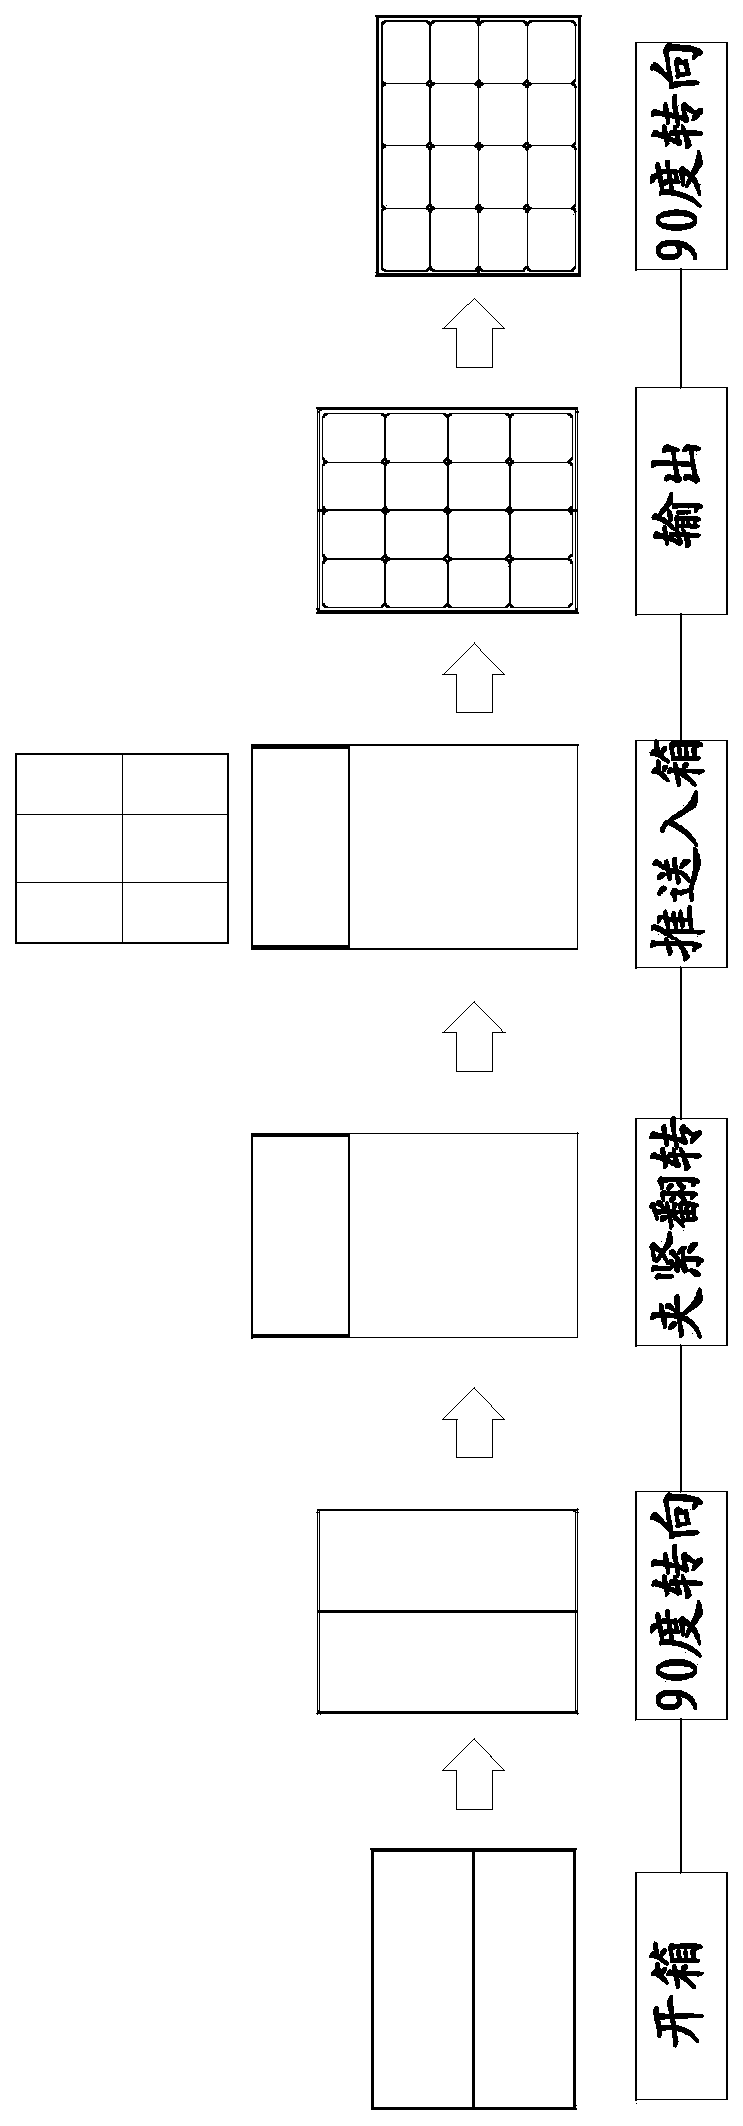 A packing method for rectangular objects